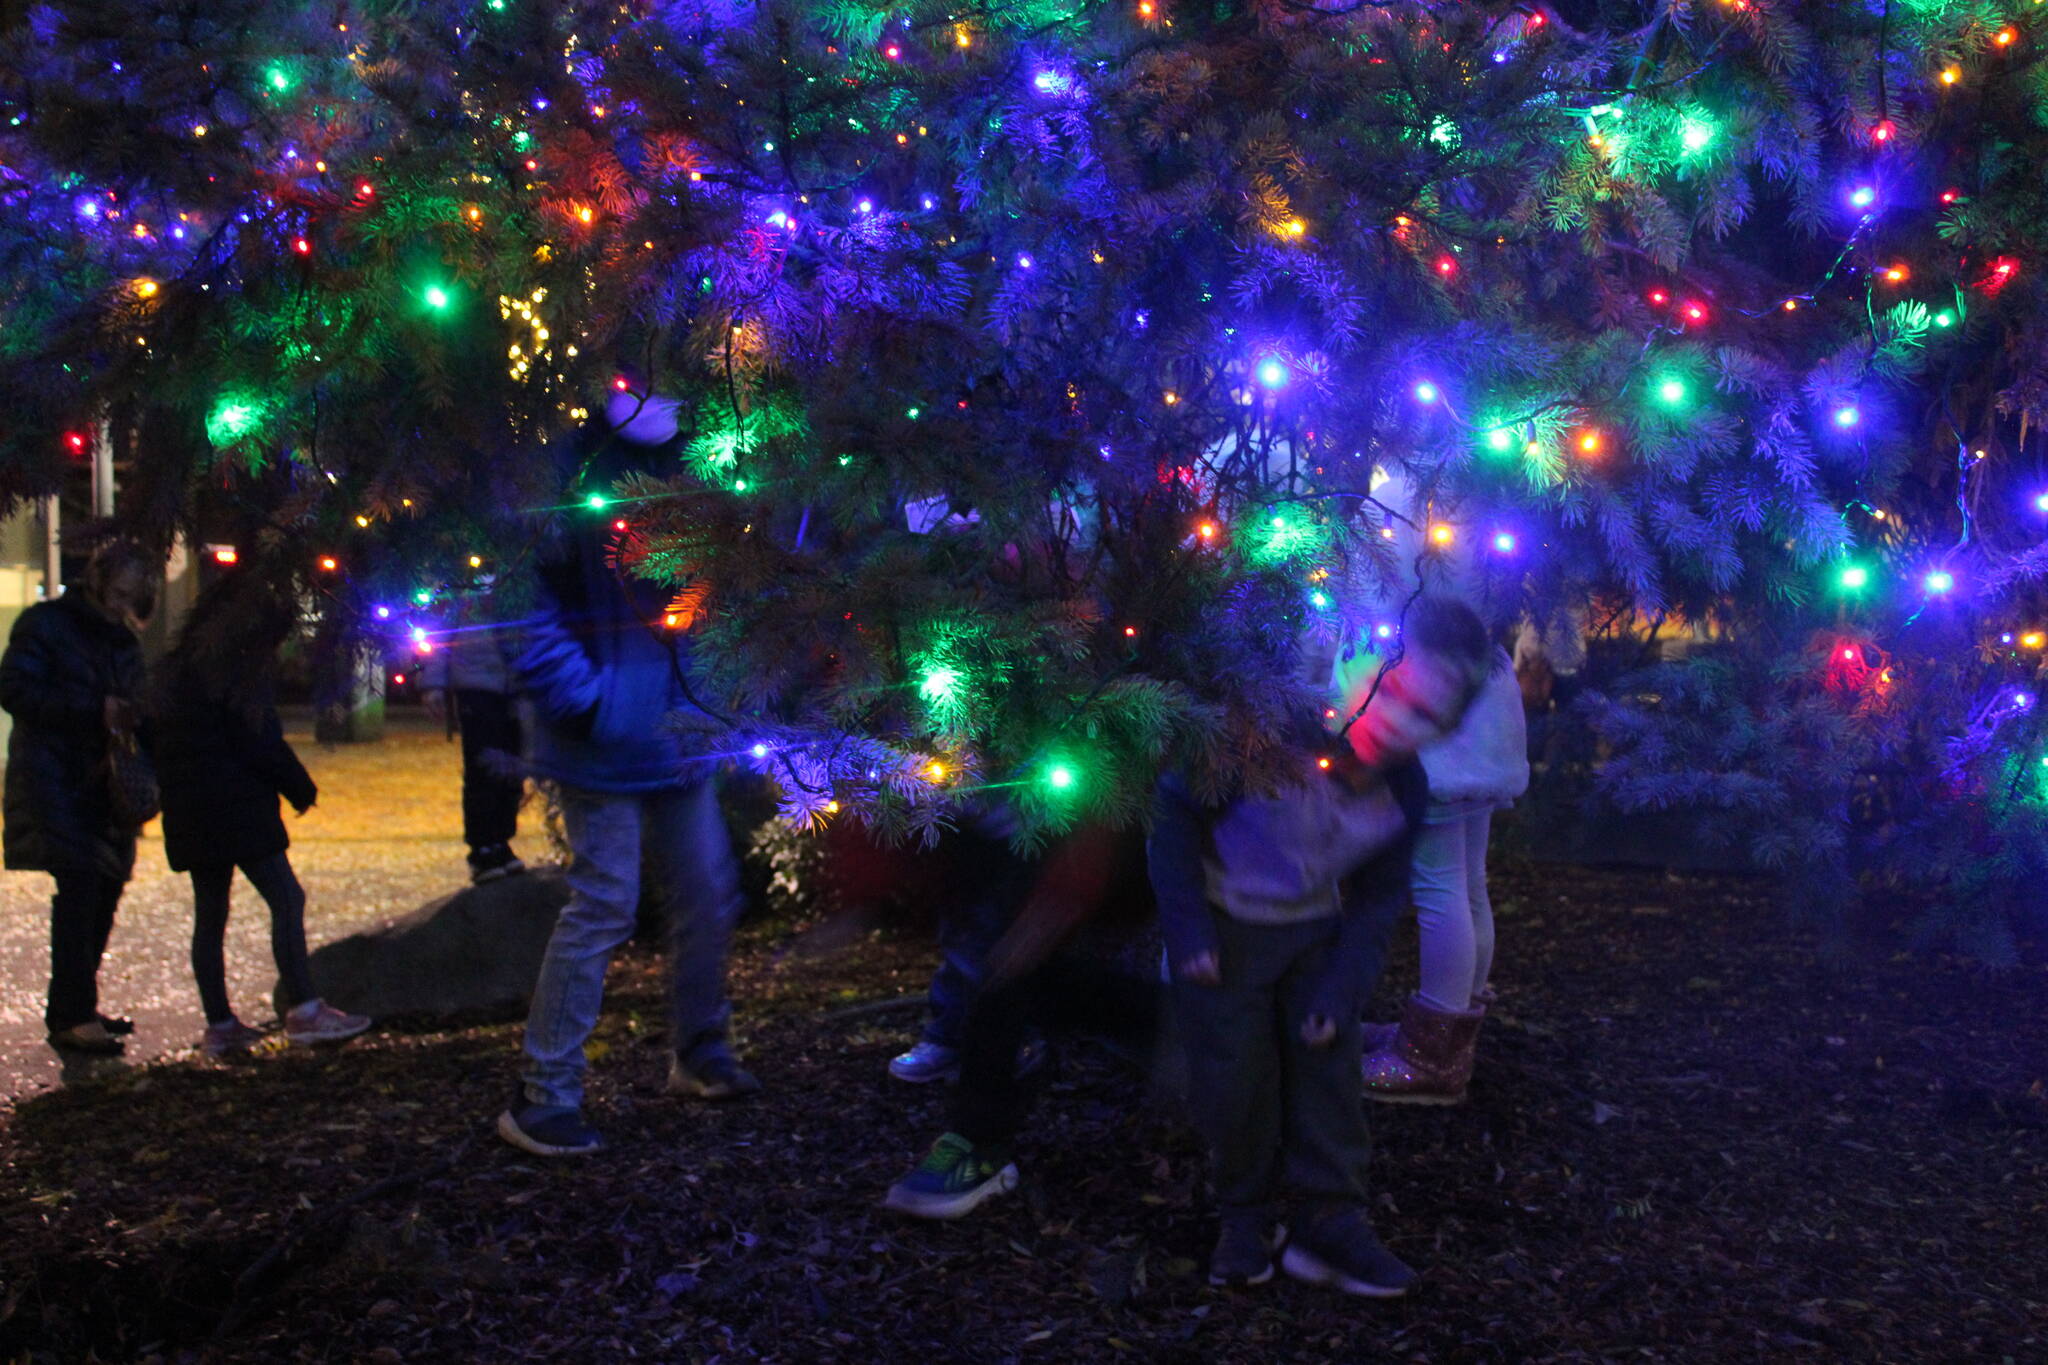 As soon as the Christmas tree was lit, children ran beneath the tree to play under the lights. Photo by Bailey Jo Josie/Sound Publishing.